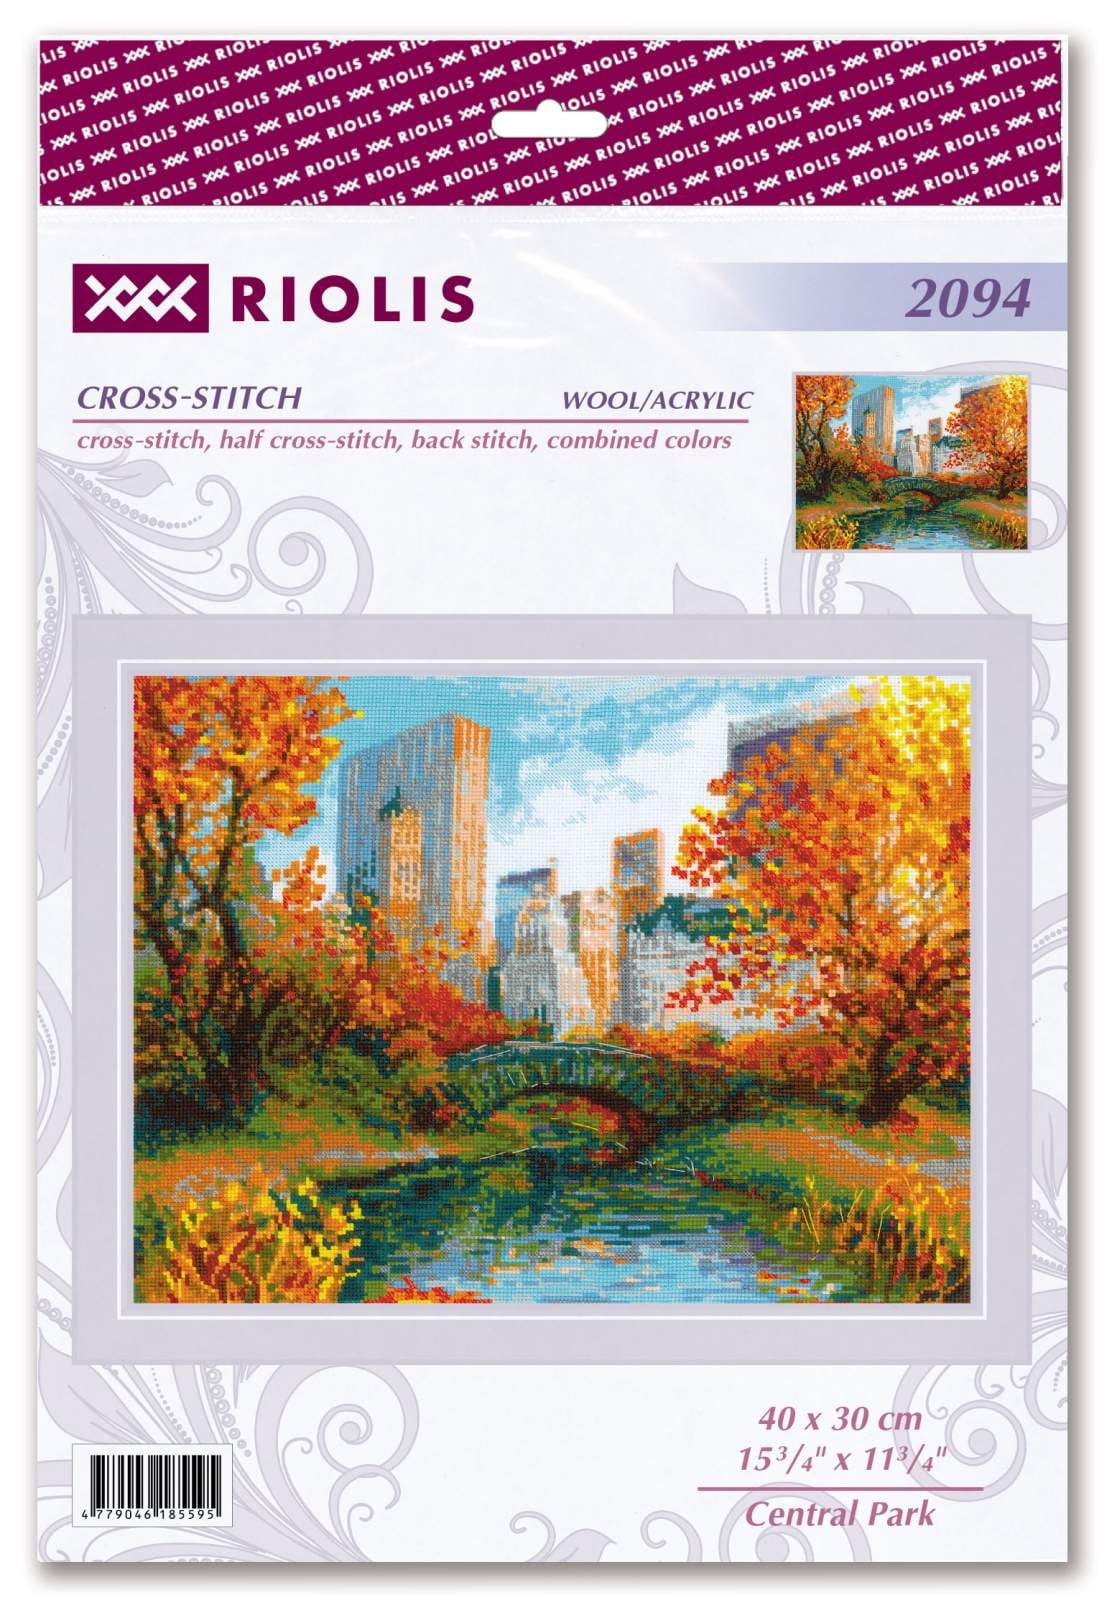 RIOLIS 12 Colorful Flight Counted Cross Stitch Kit